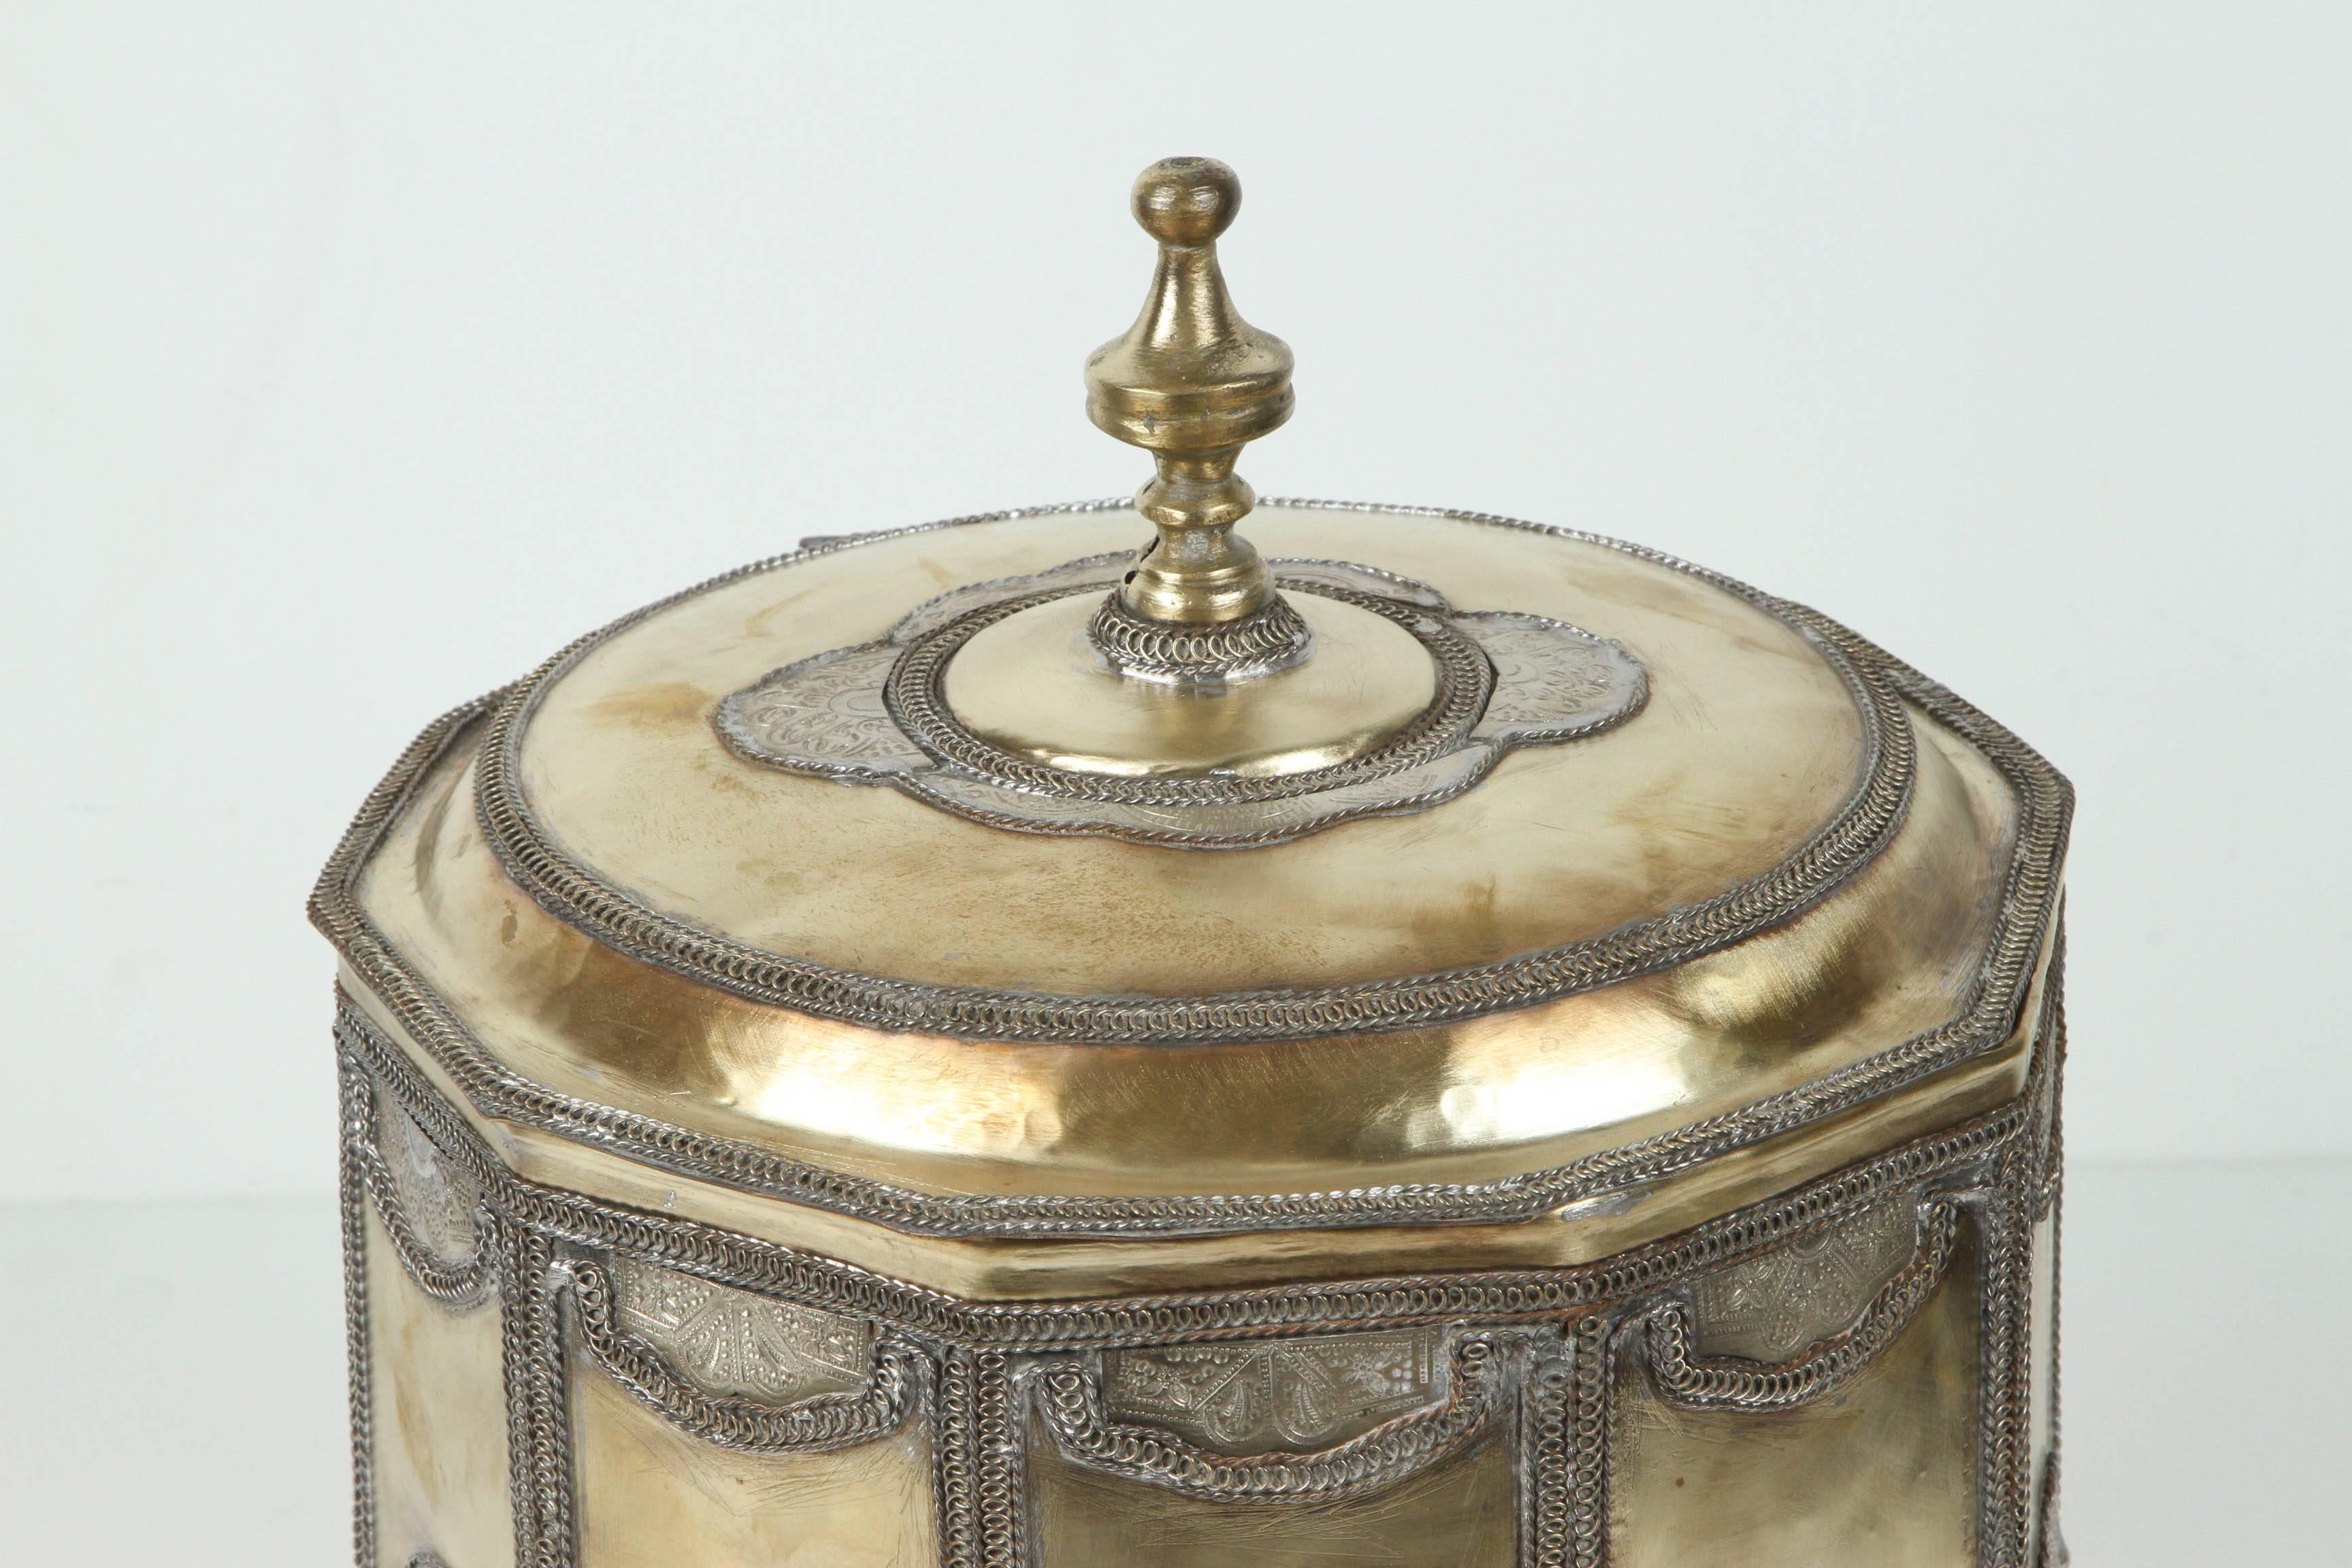 Large brass Moroccan footed cookie jar with filigree designs and hammered silvered round arabesque and Moorish decor.
Polished brass, handcrafted in Fez, Morocco by metalworker artisans.